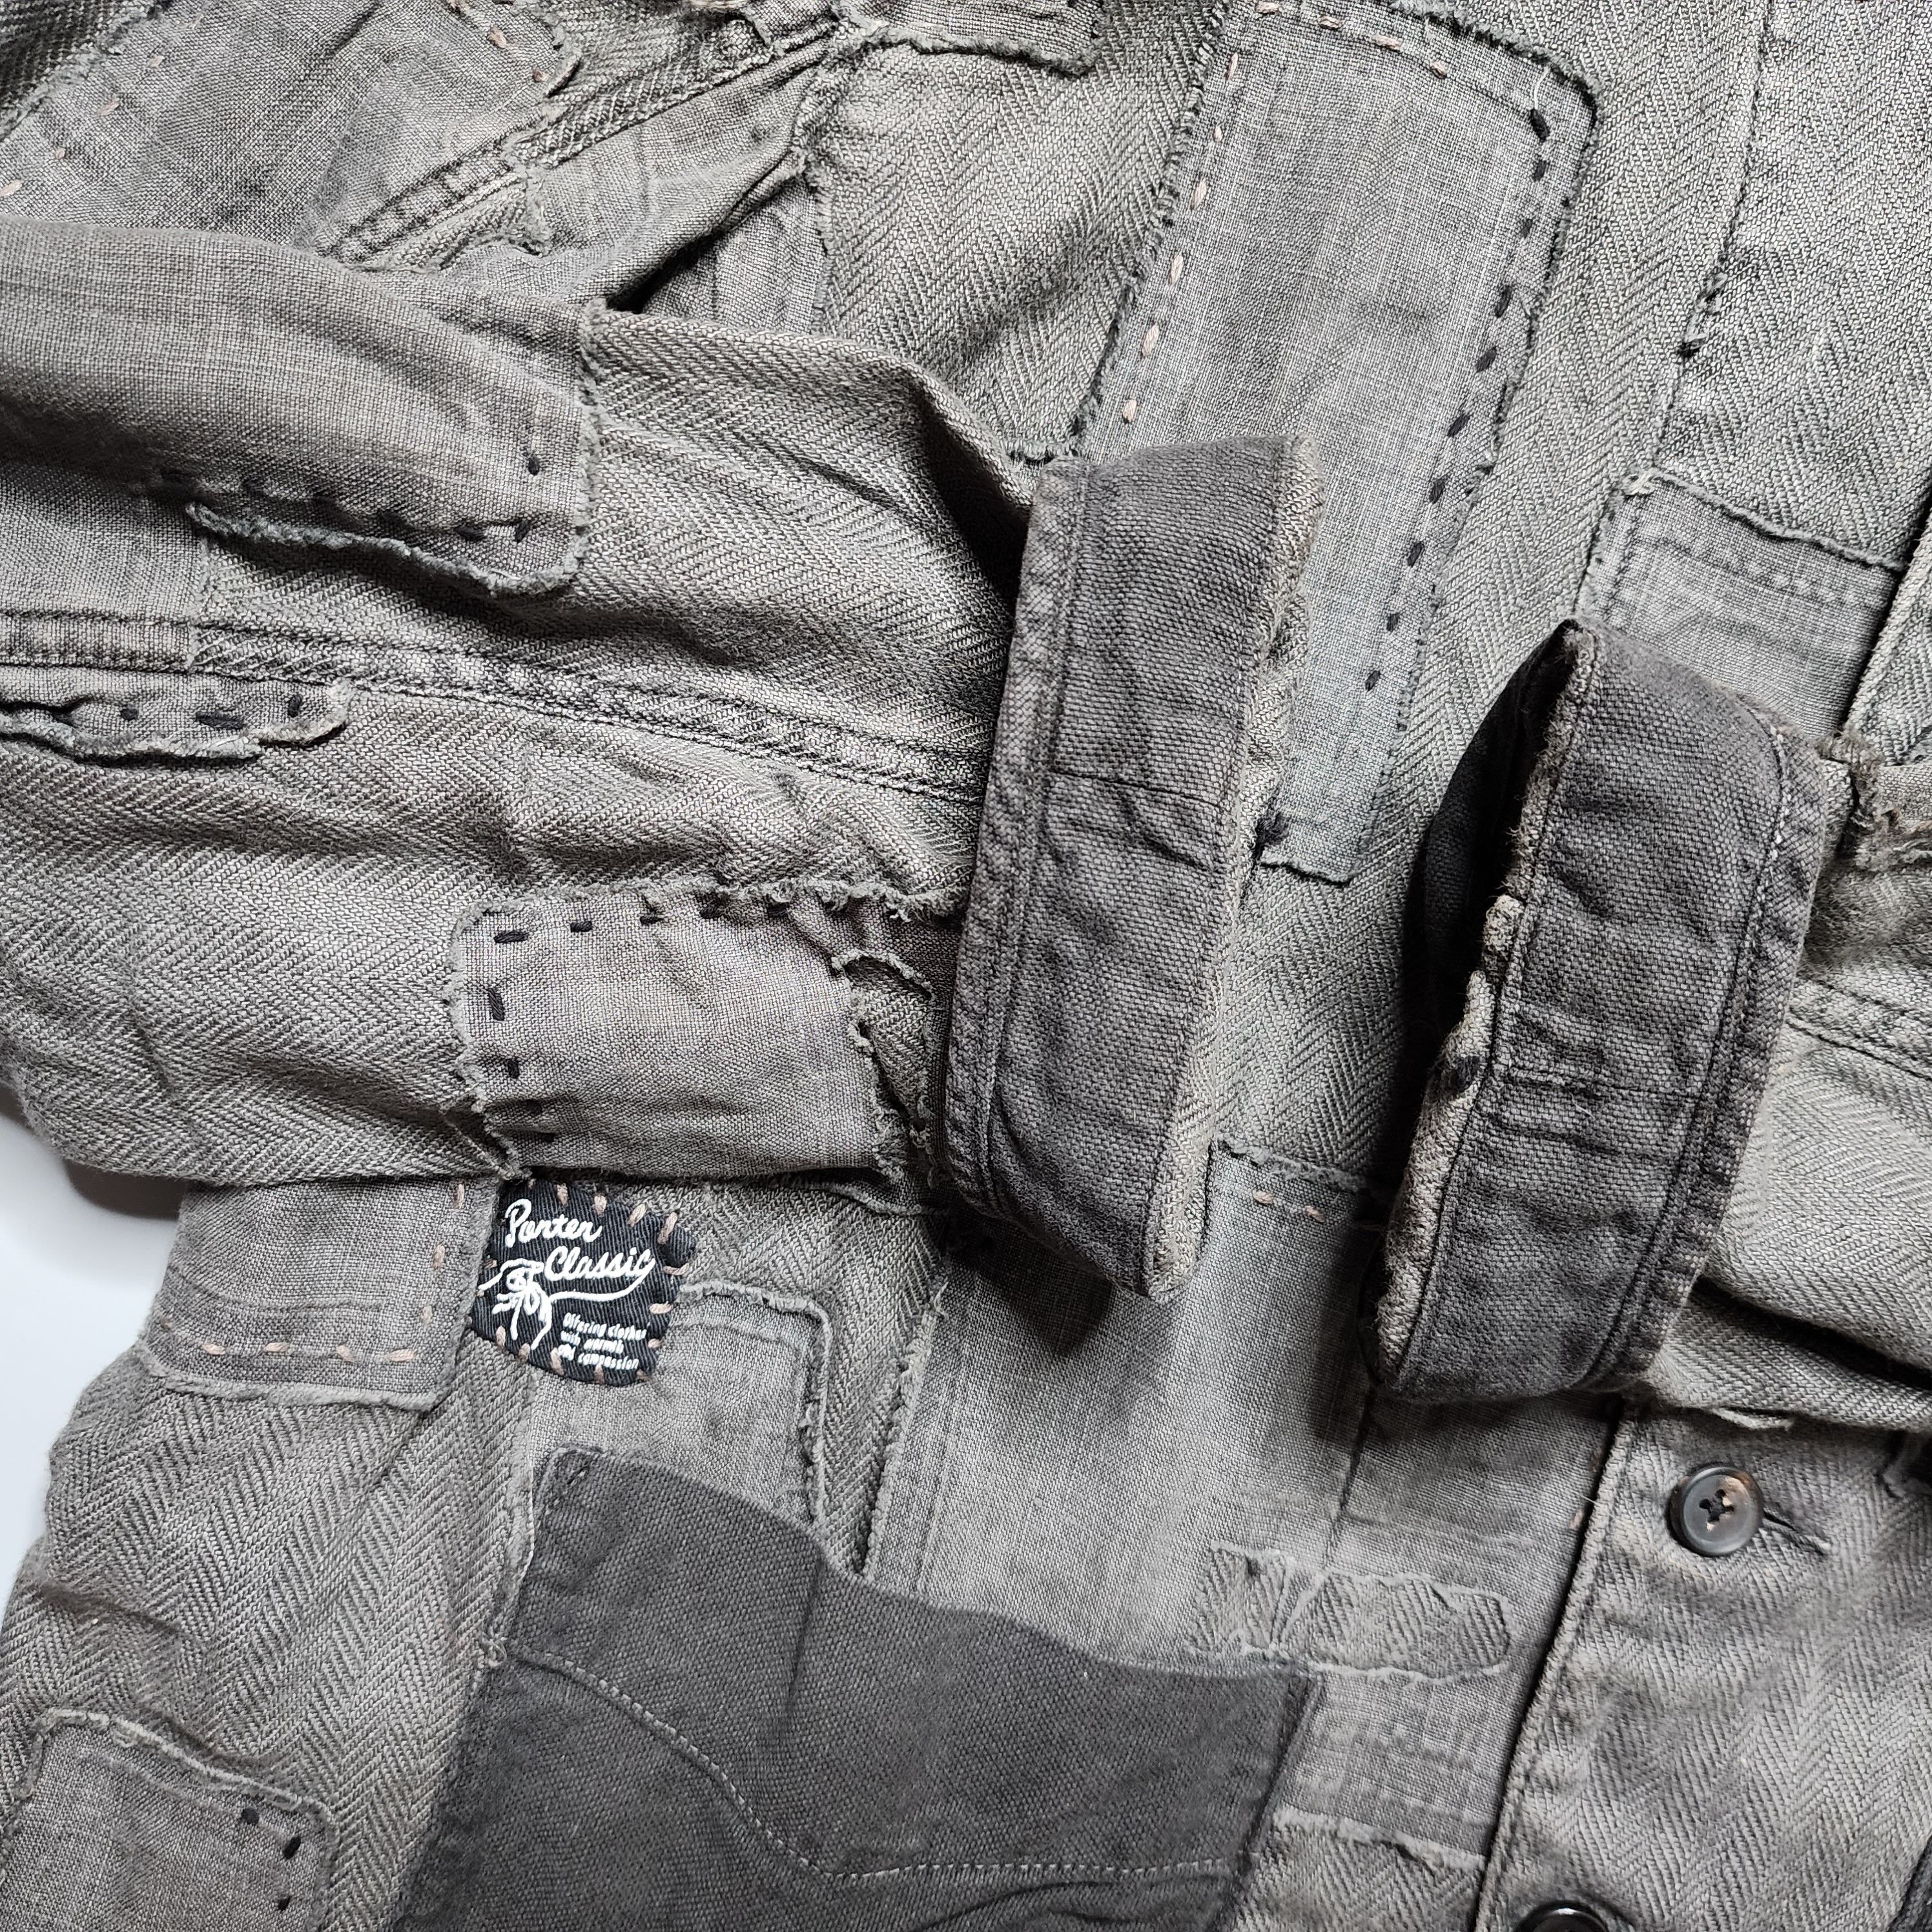 Porter Classic - SS13 Boro Patchwork French Work Jacket - 6